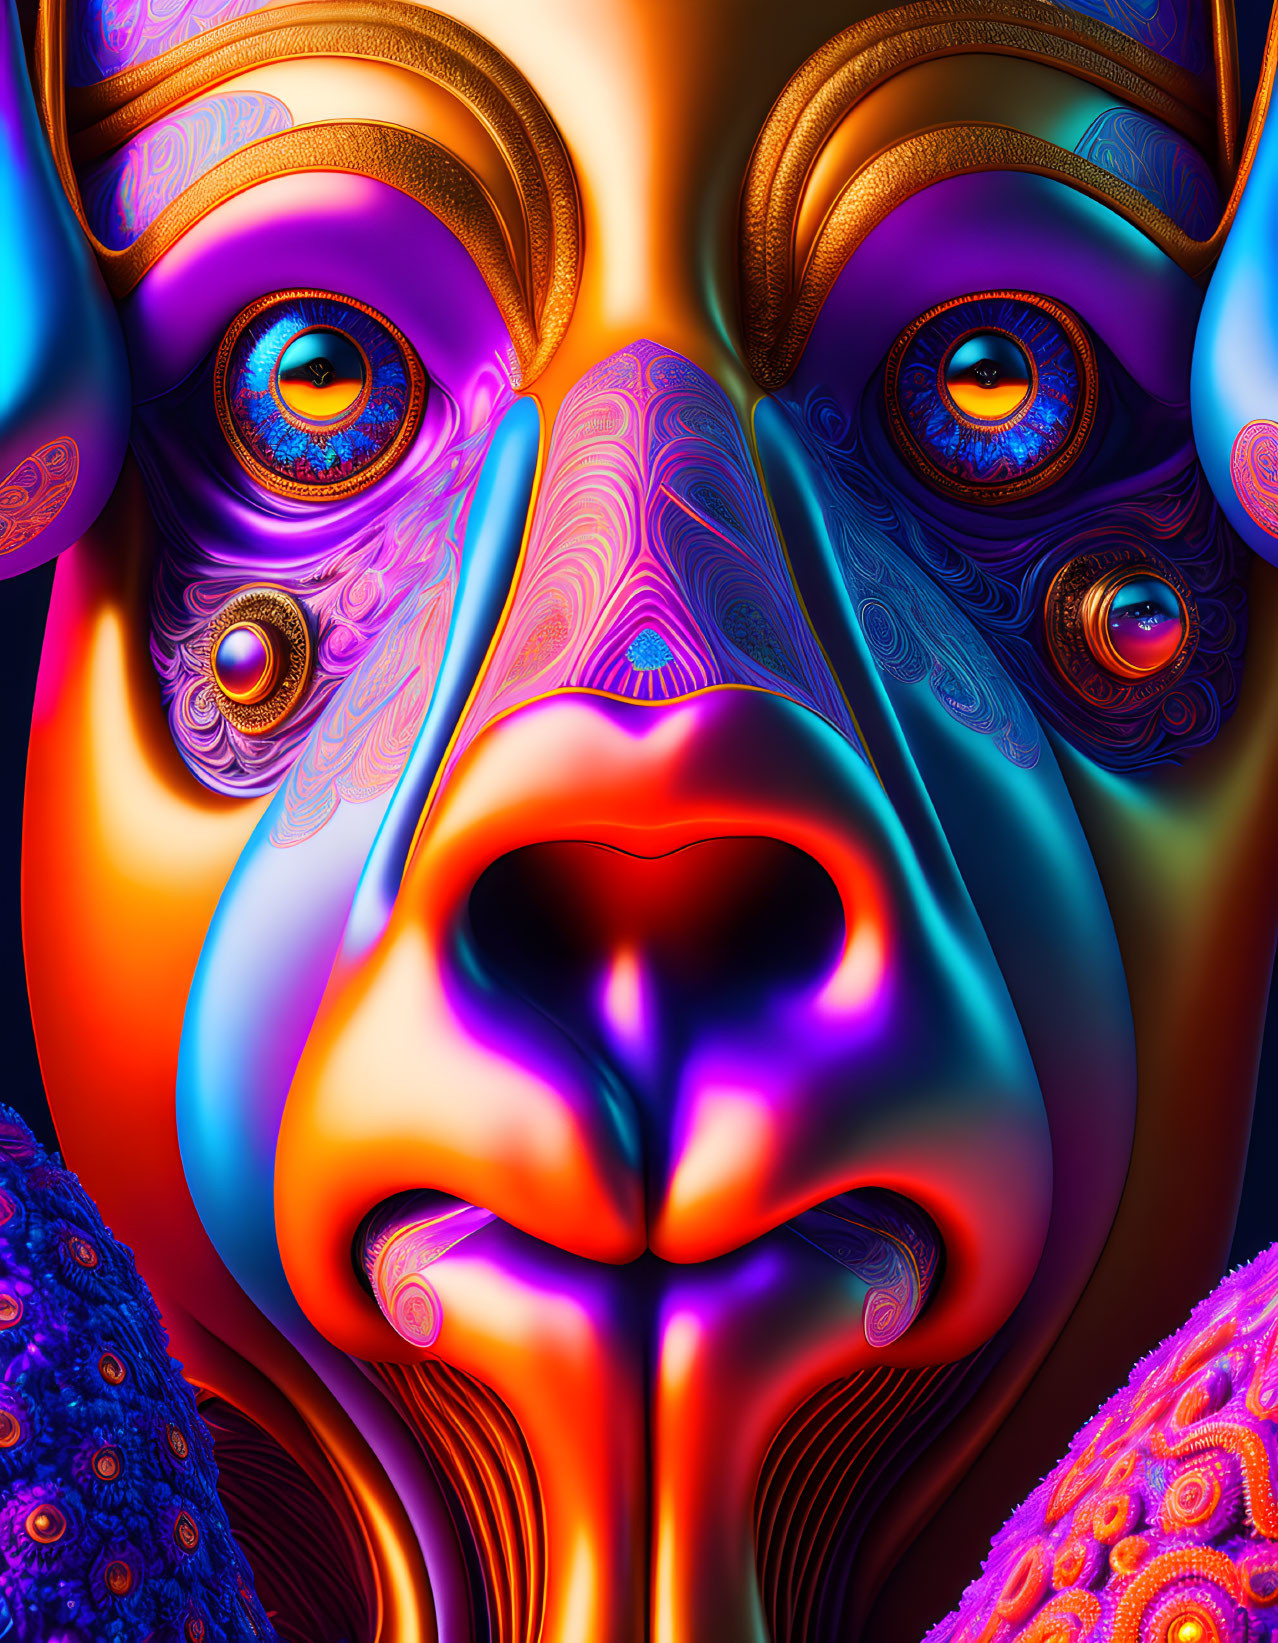 Colorful surreal face with textured patterns and heart-shaped nose